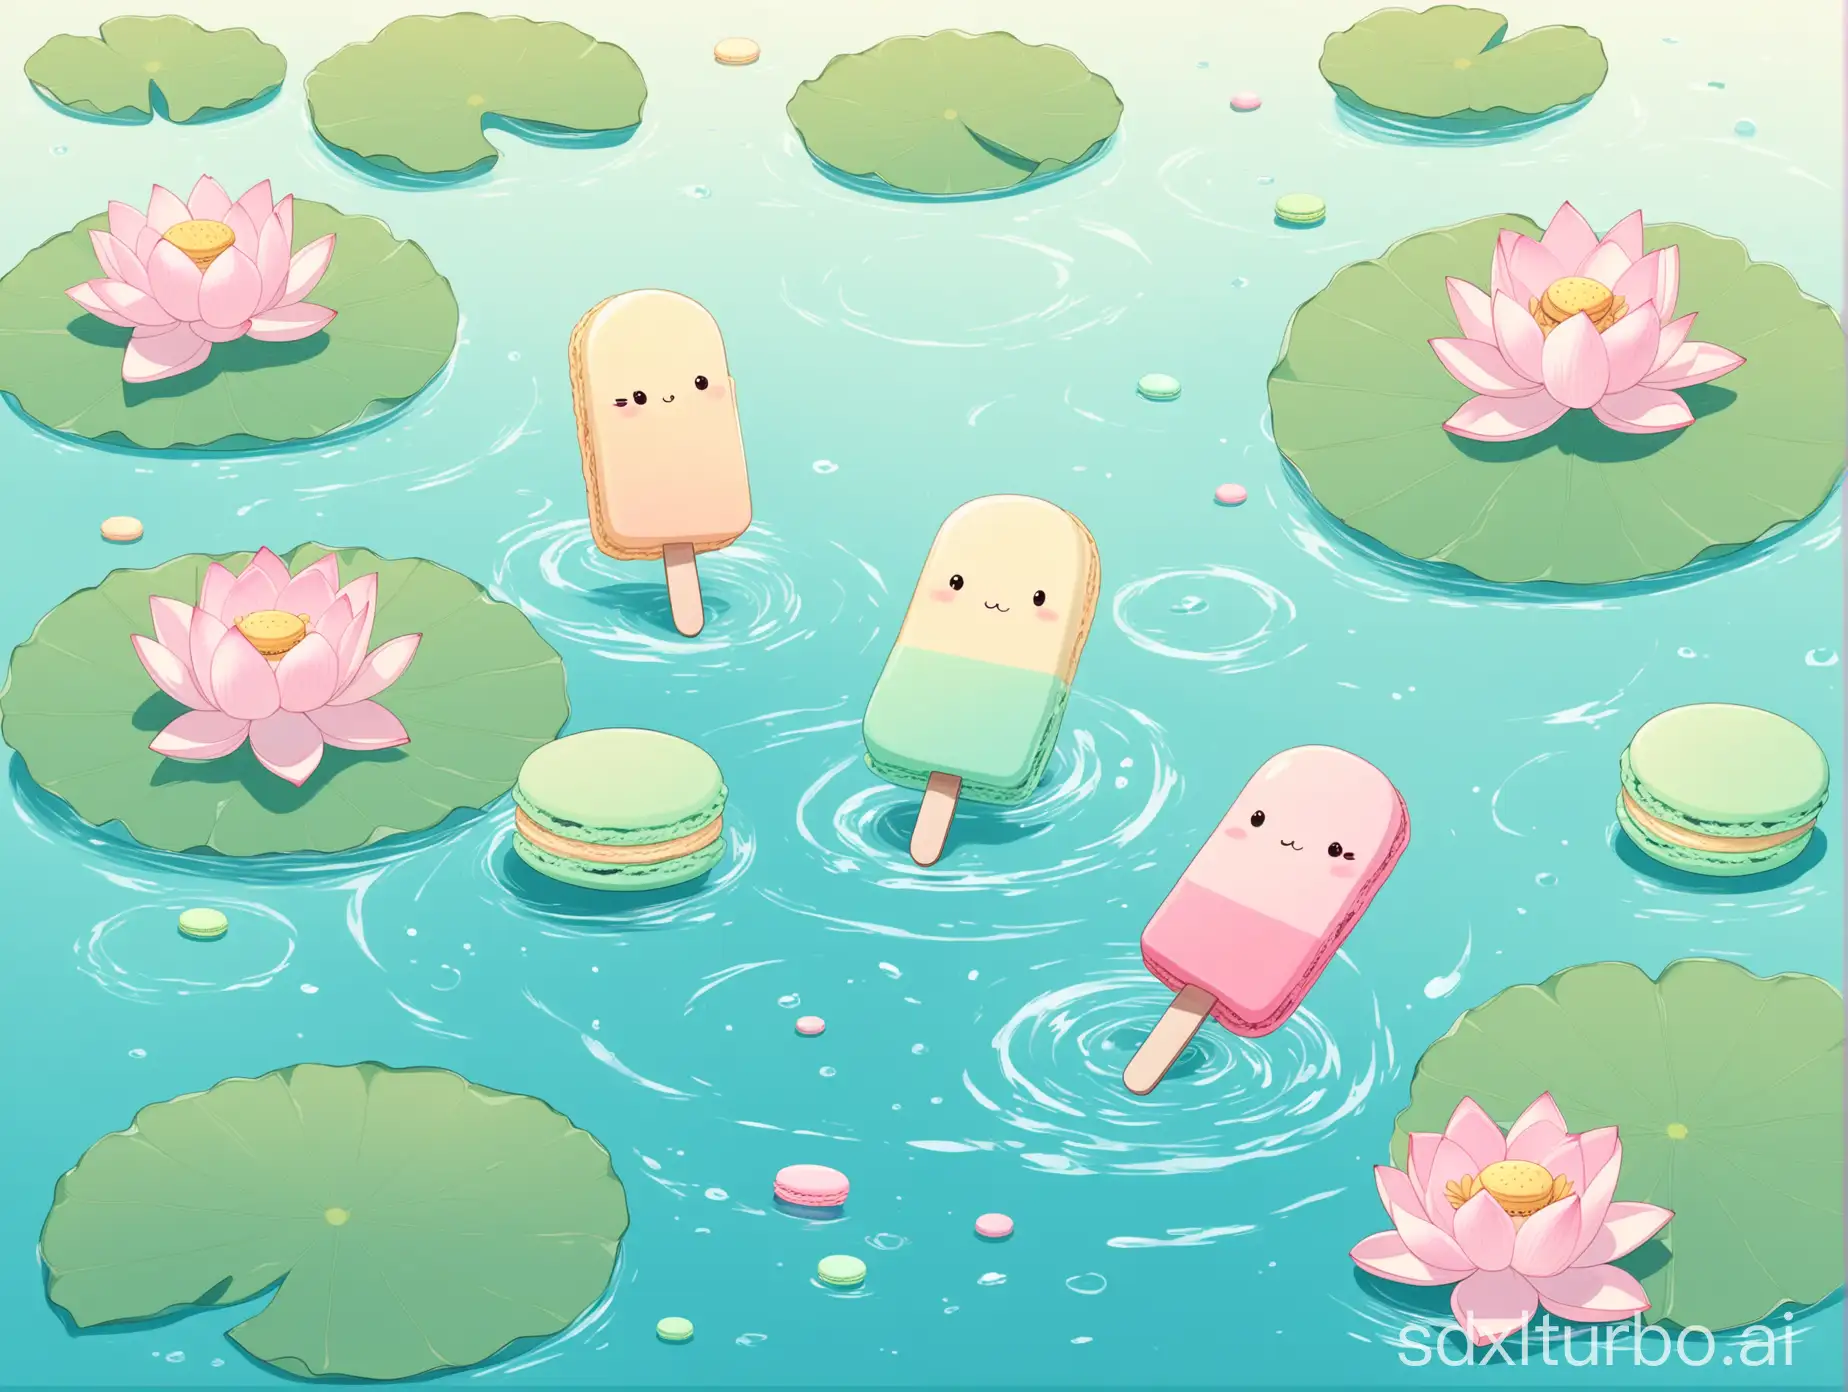 Adorable-Cartoon-Popsicle-Floating-on-Lotus-Pond-with-Delicate-MacaronColored-Flowers